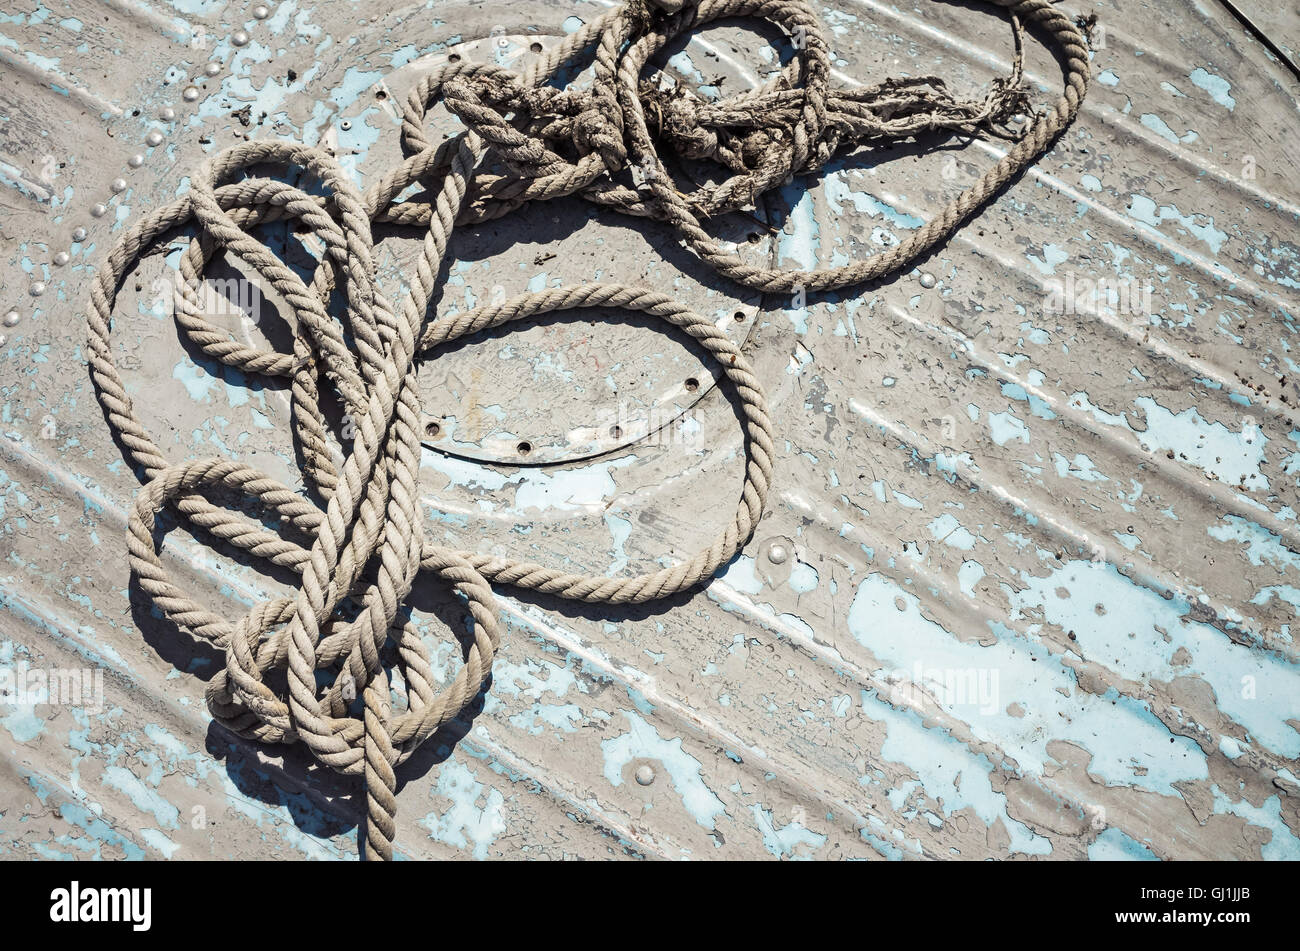 Knotted mooring rope lying on grungy boat deck Stock Photo